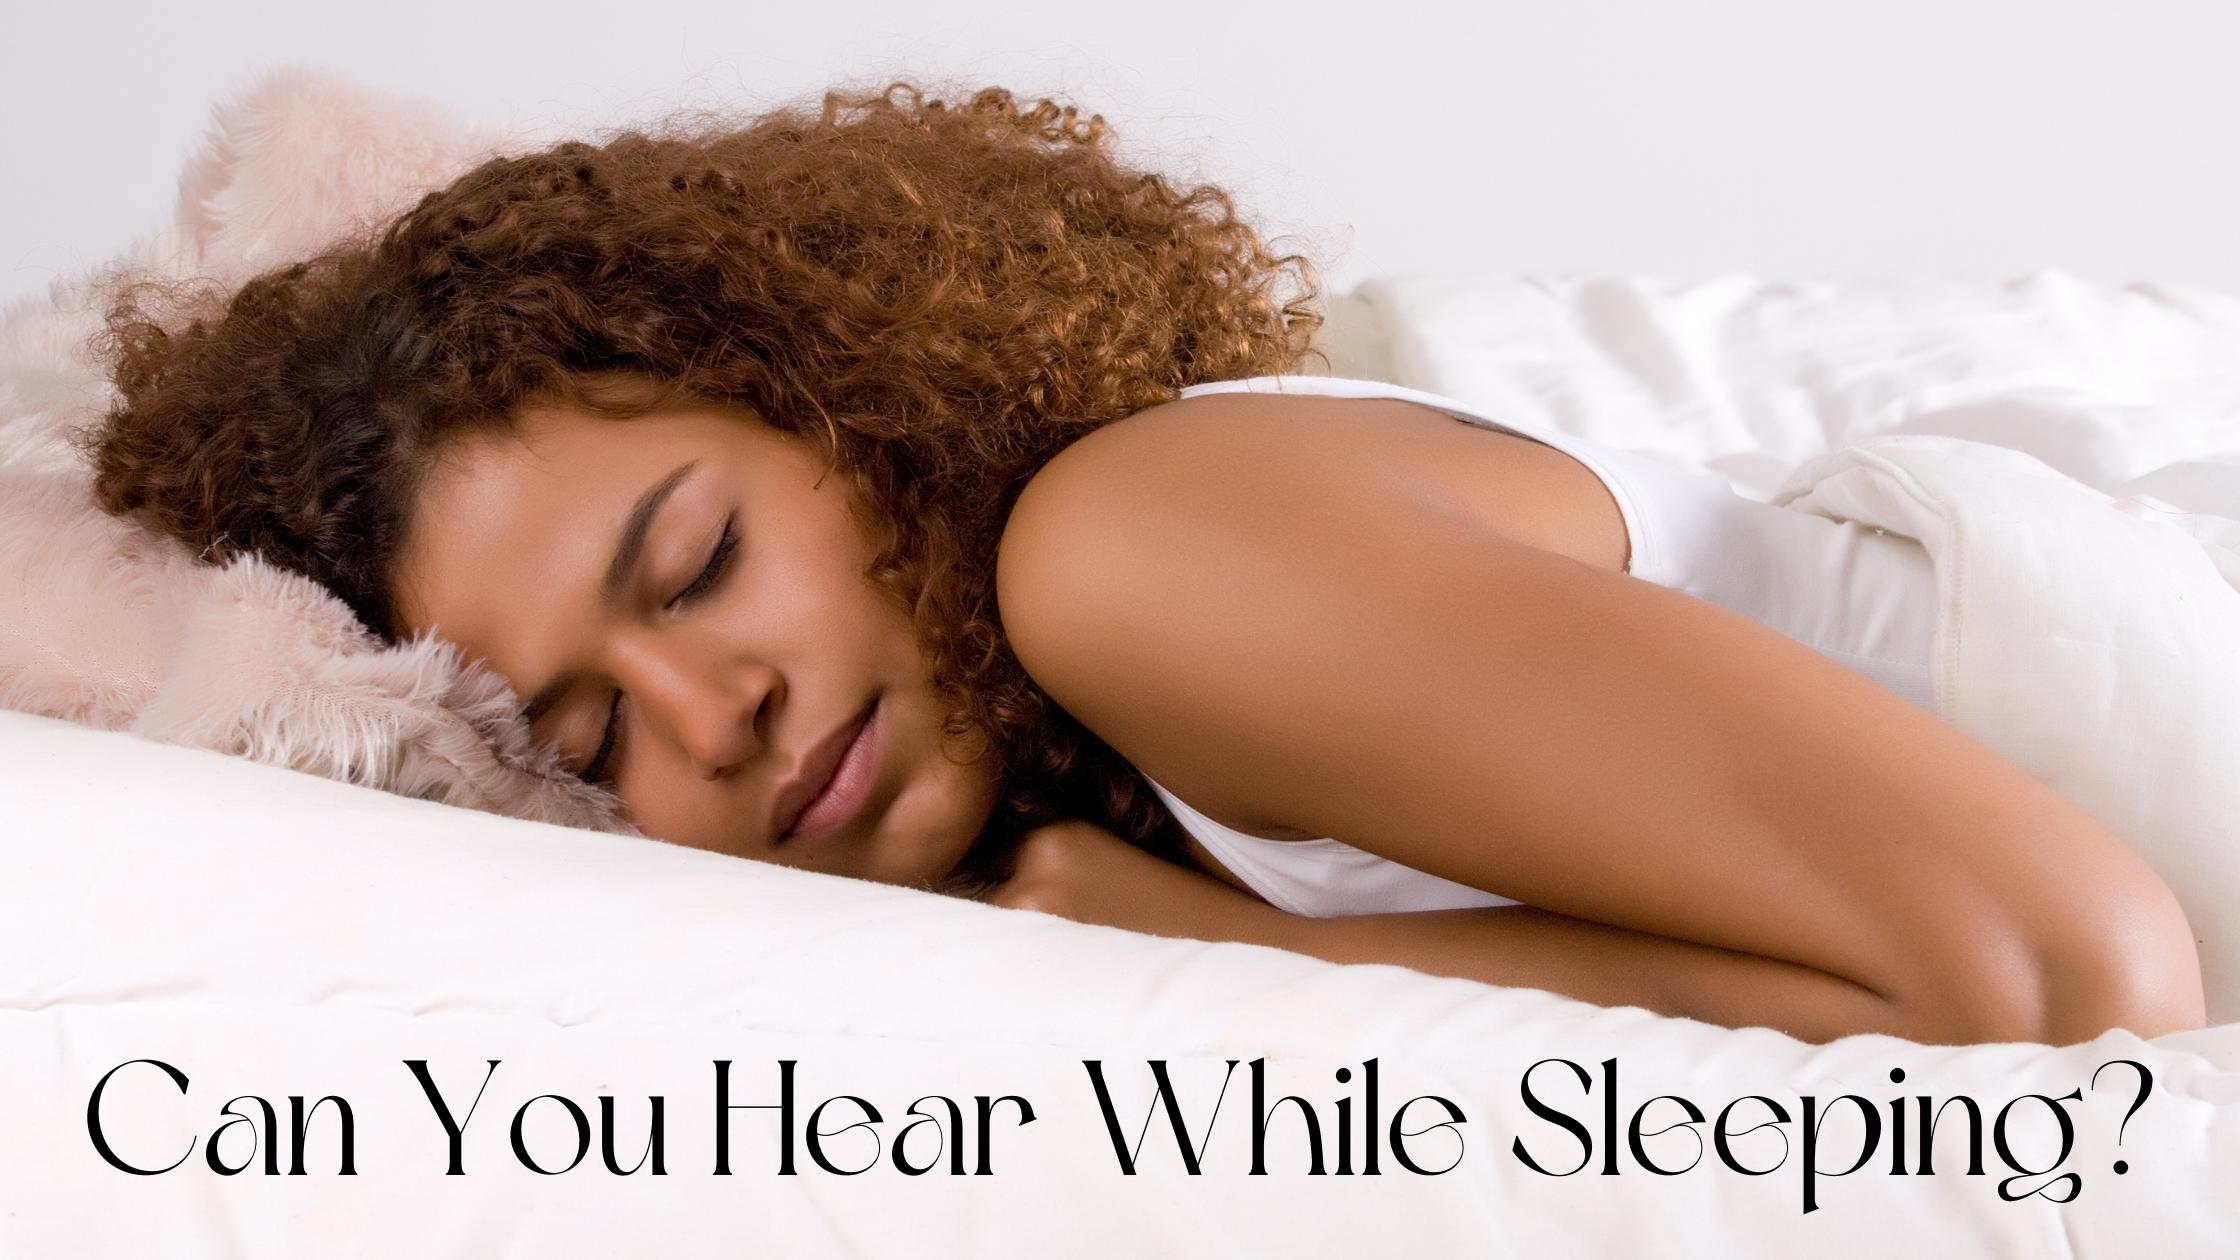 https://www.lifestylehearingsolutions.com/wp-content/uploads/2021/12/Can-You-Hear-While-Sleeping-1.jpg